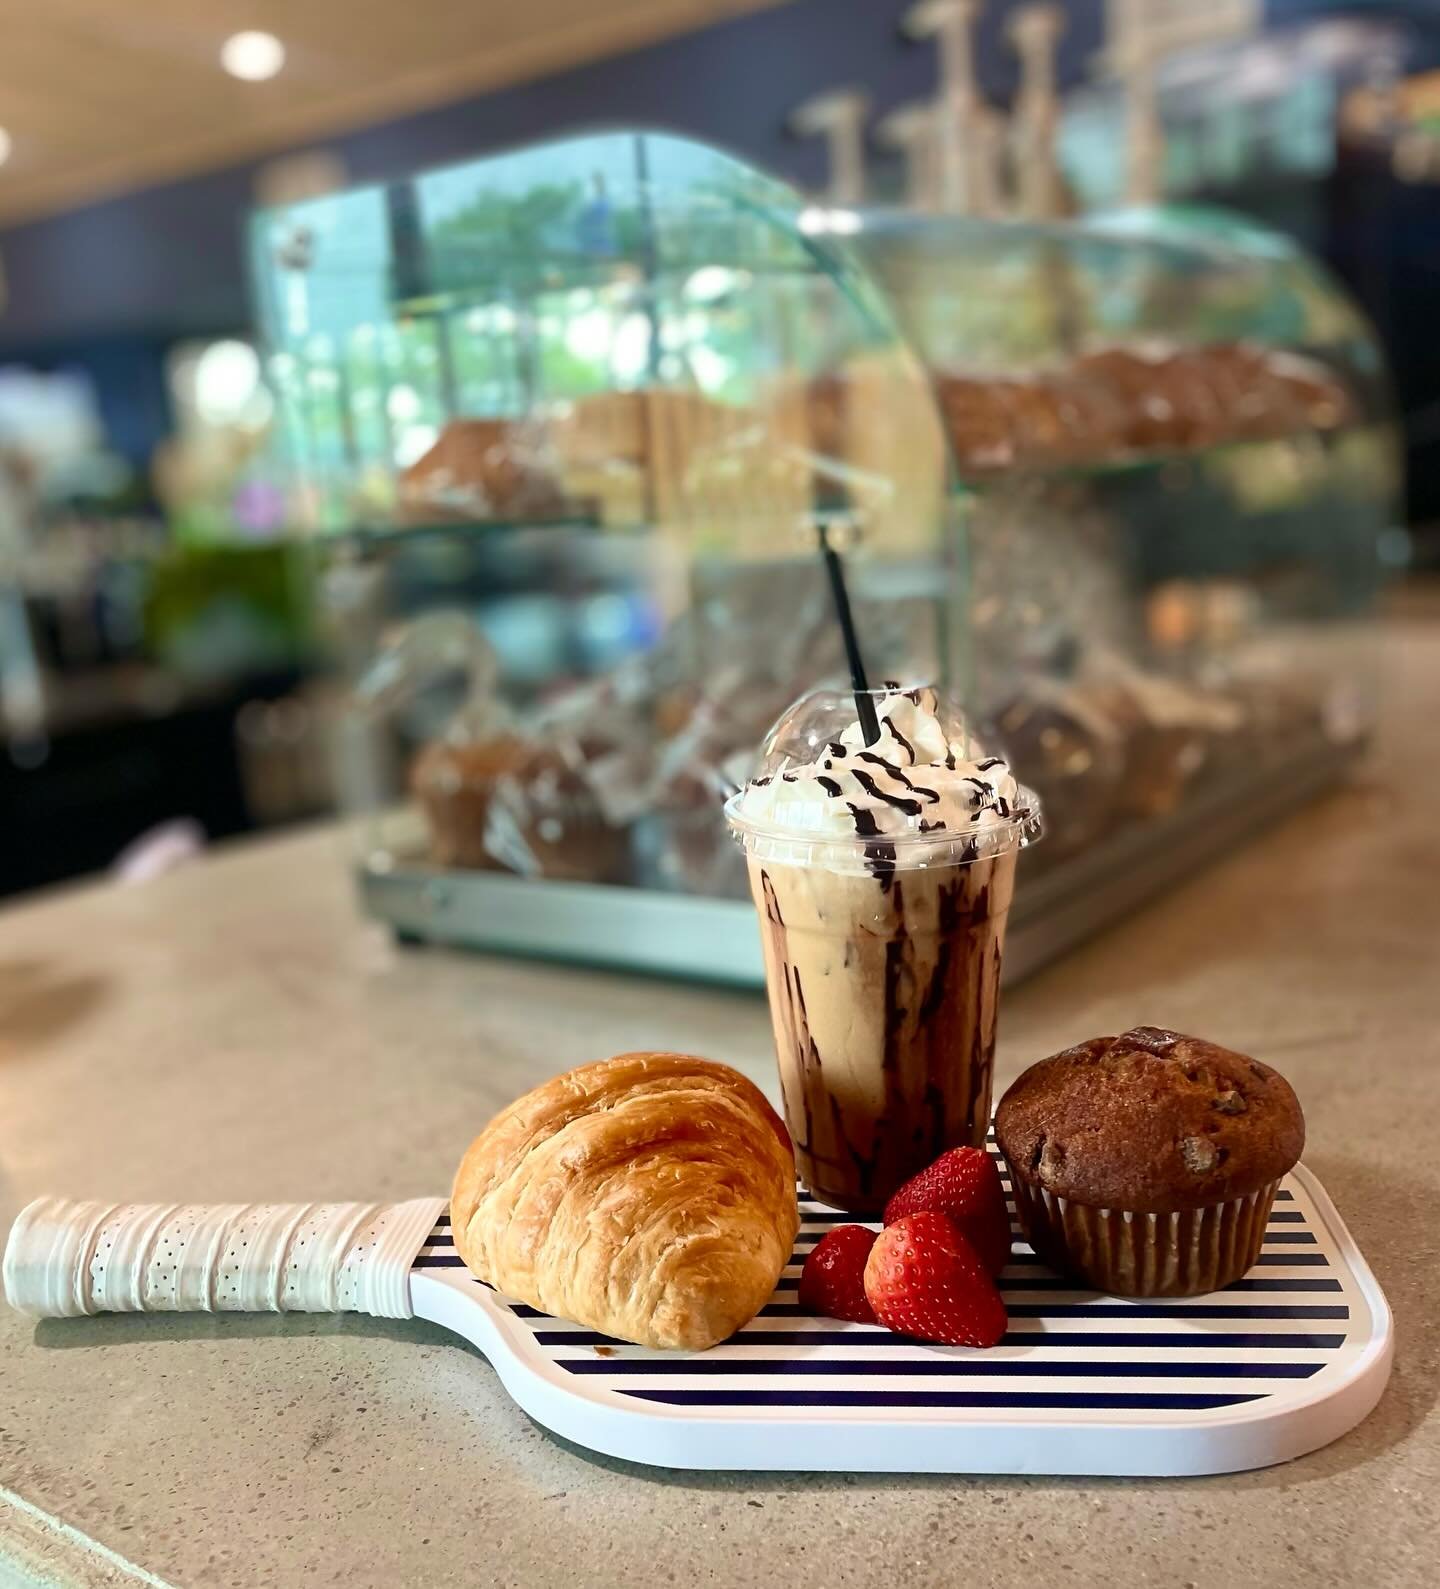 We are now serving pastries at our coffee shop 7 days a week! Stop by for some caffeine and a sweet treat ☕️🥐🍪

Coffee hours: Mon-Fri 8am-5pm | Sat-Sun 8am-4pm